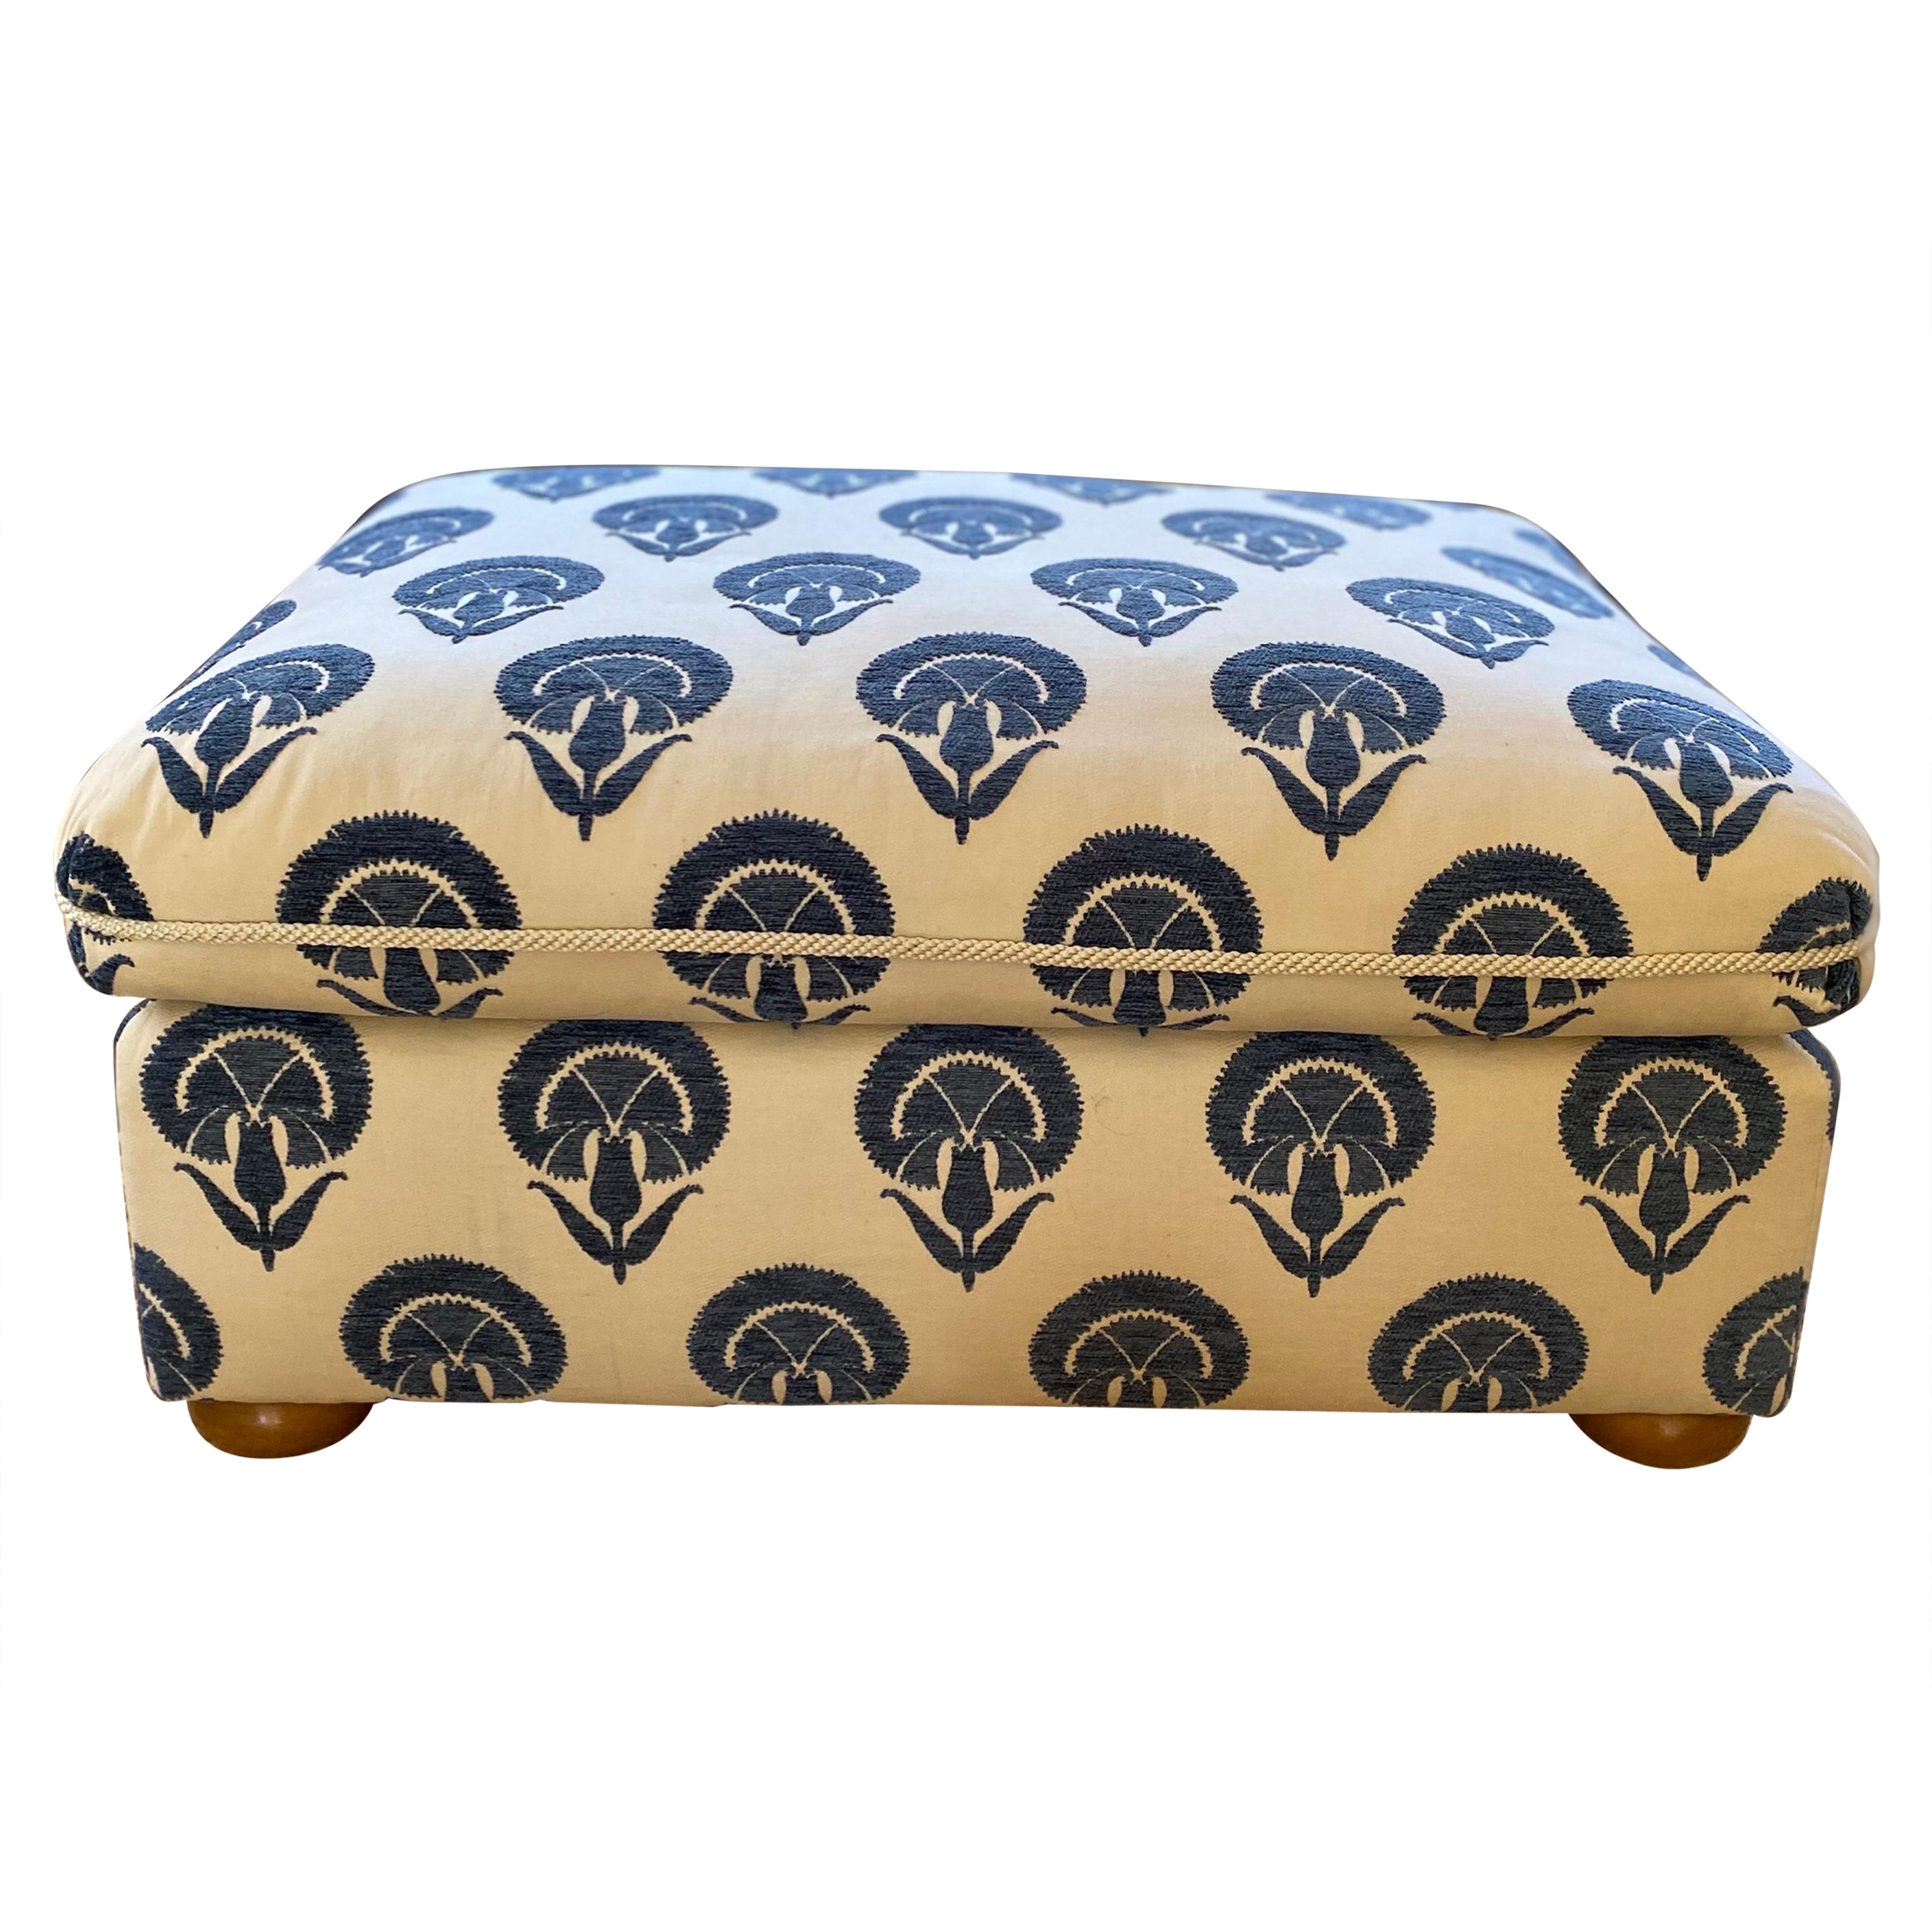 Custom Upholstered Ottoman with Bun Feet in Blue Ottoman Flower Fabric For Sale